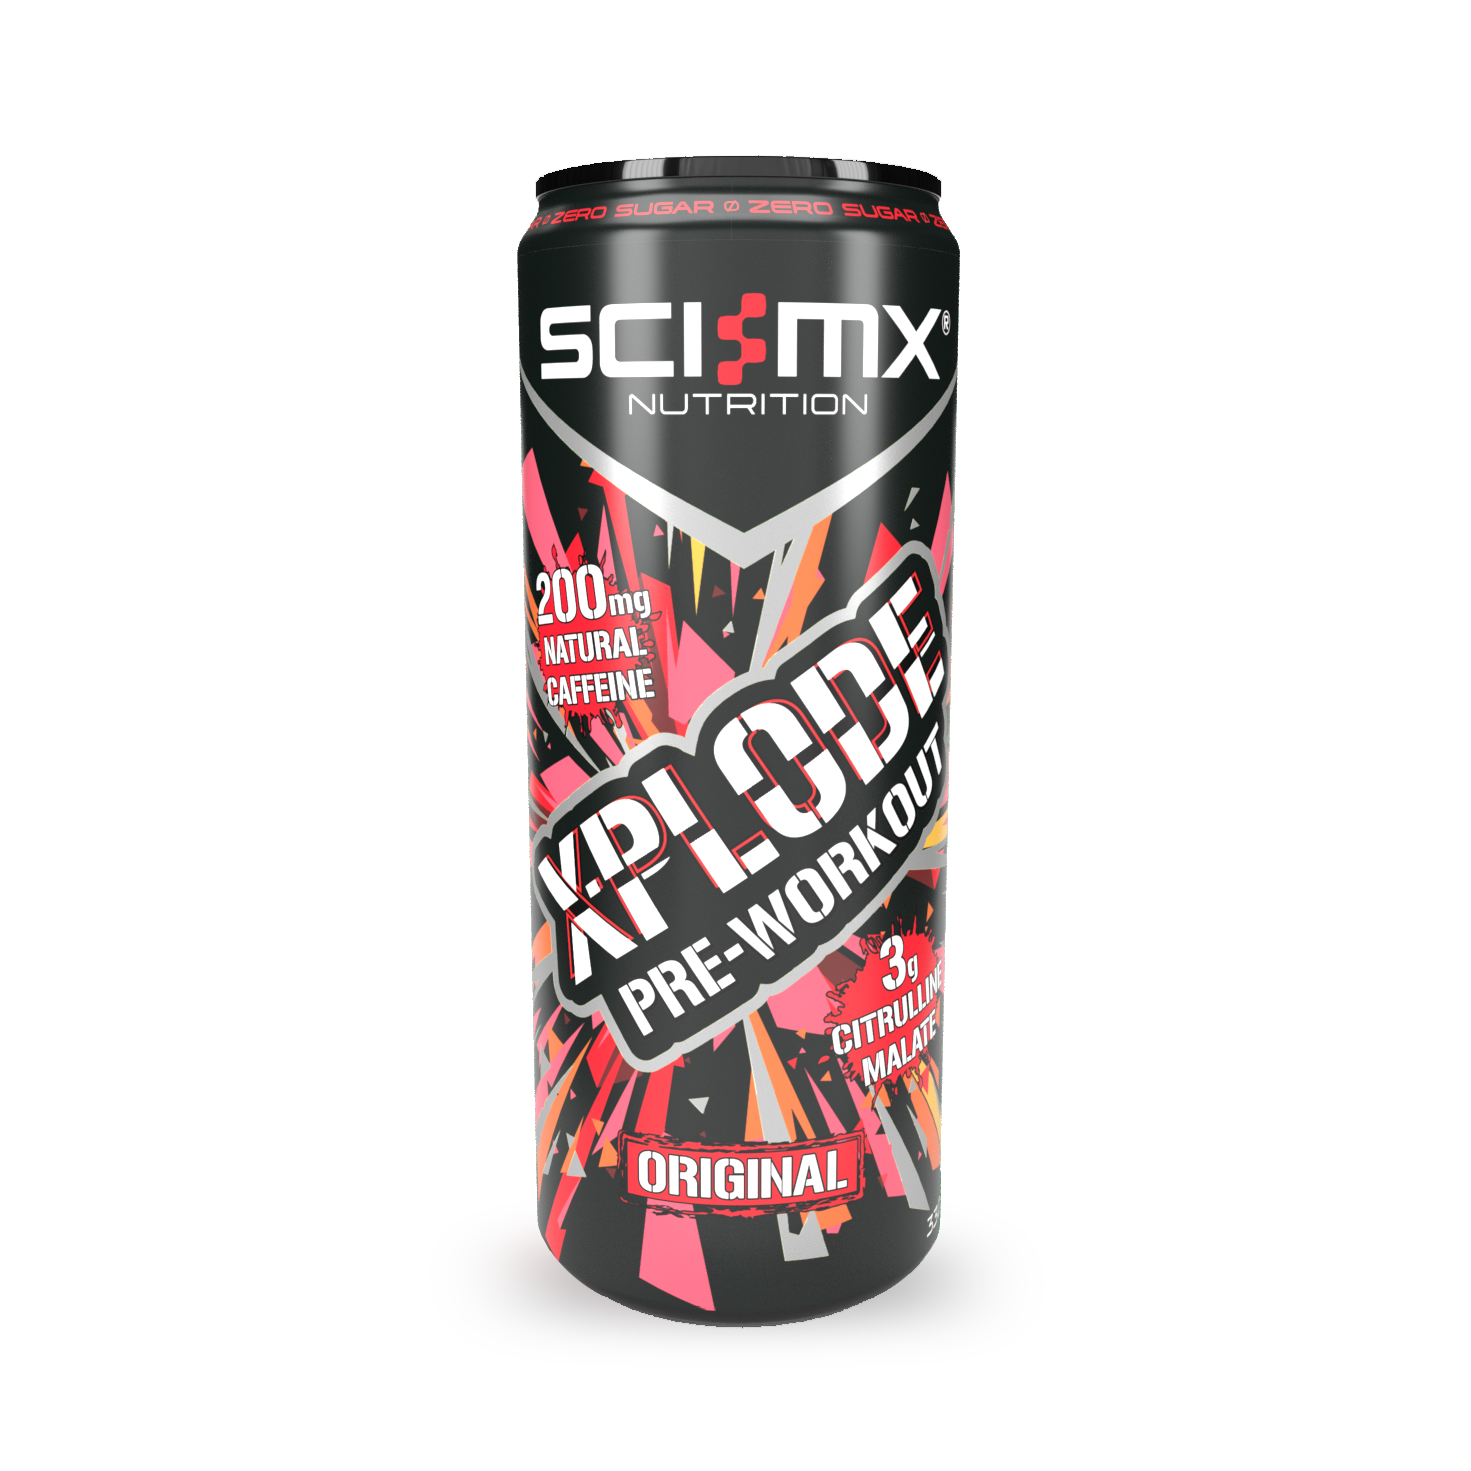 X-PLODE PRE-WORKOUT CAN